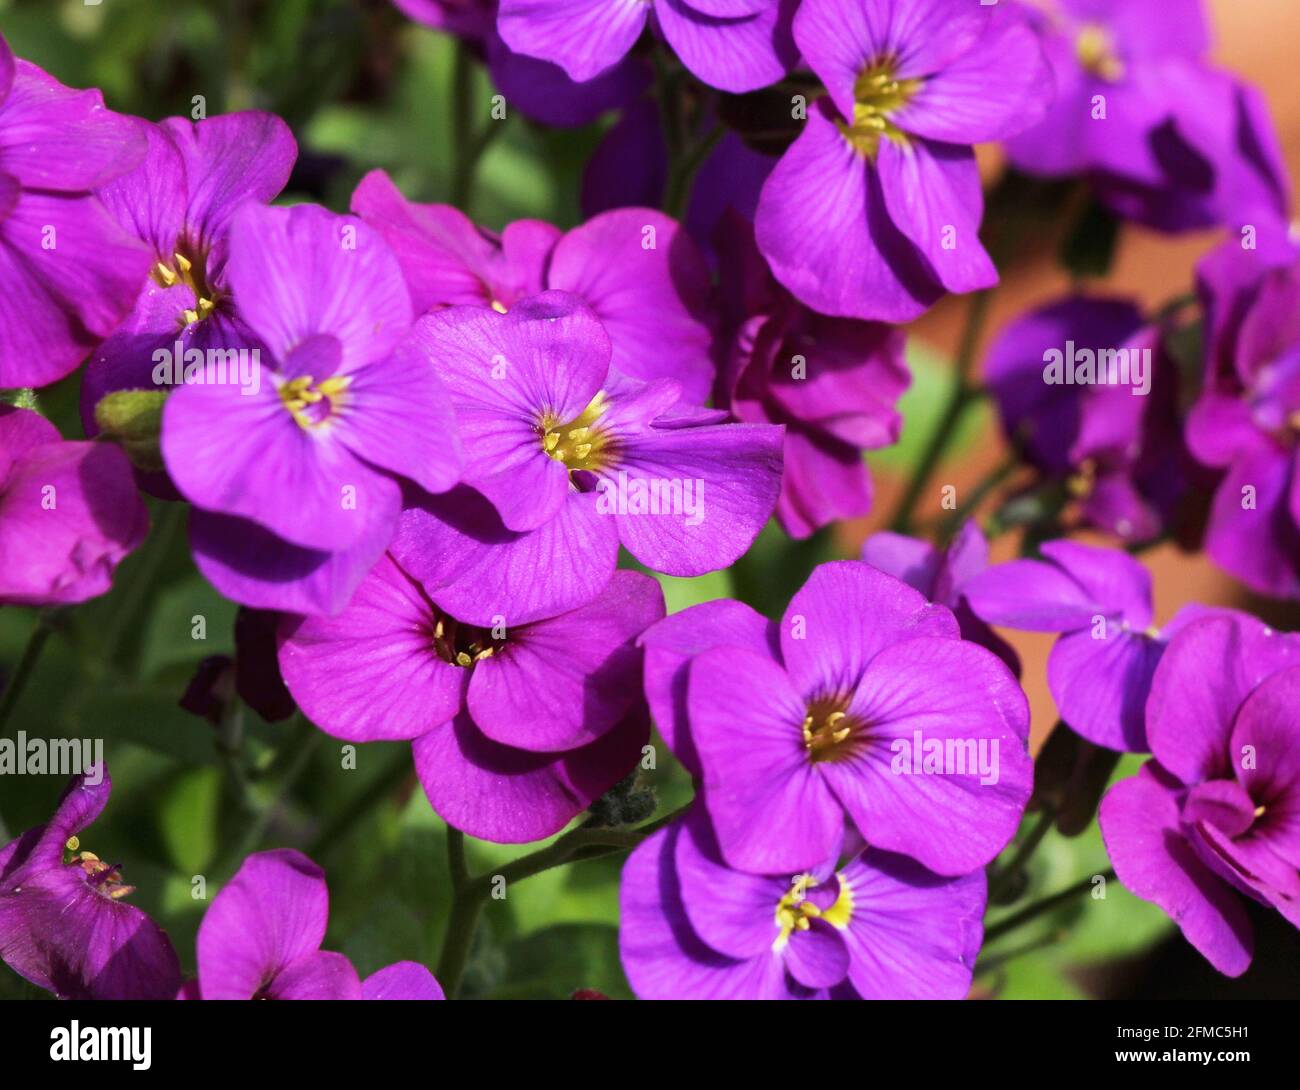 An Image Of Purple Pink Aubrietia Flowers Stock Photo